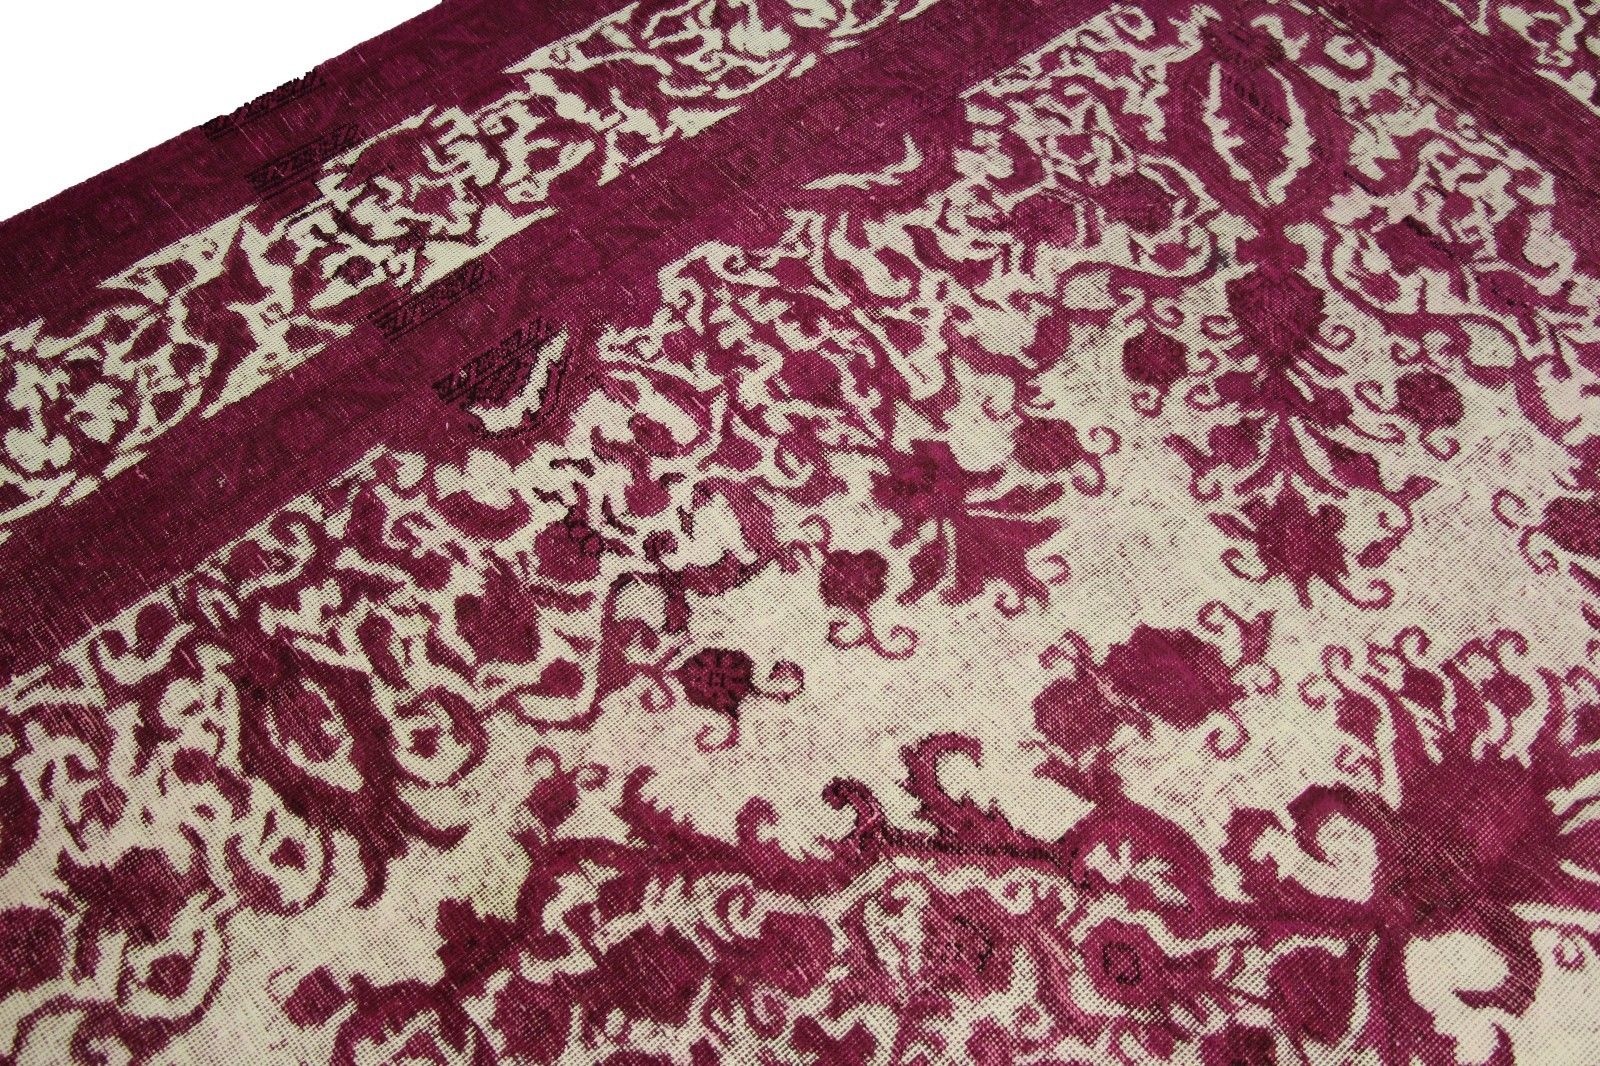 10x12 Vintage Distressed Rug Fuchsia 100% Wool Low Pile Worn Out 2907 - west of hudson